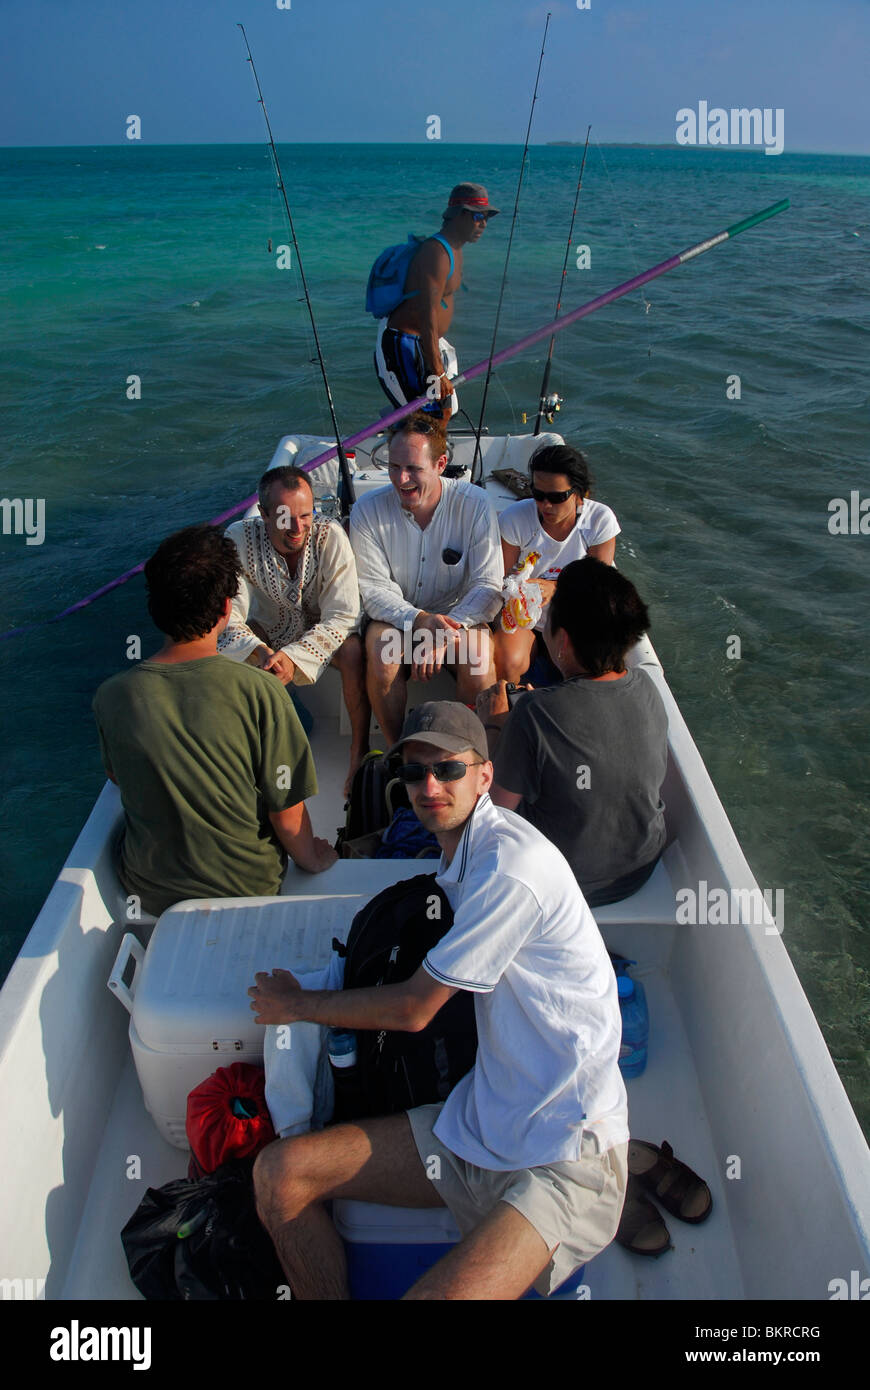 Tourists on a fishing excursion on the Caribbean Sea, Belize, Central America Stock Photo